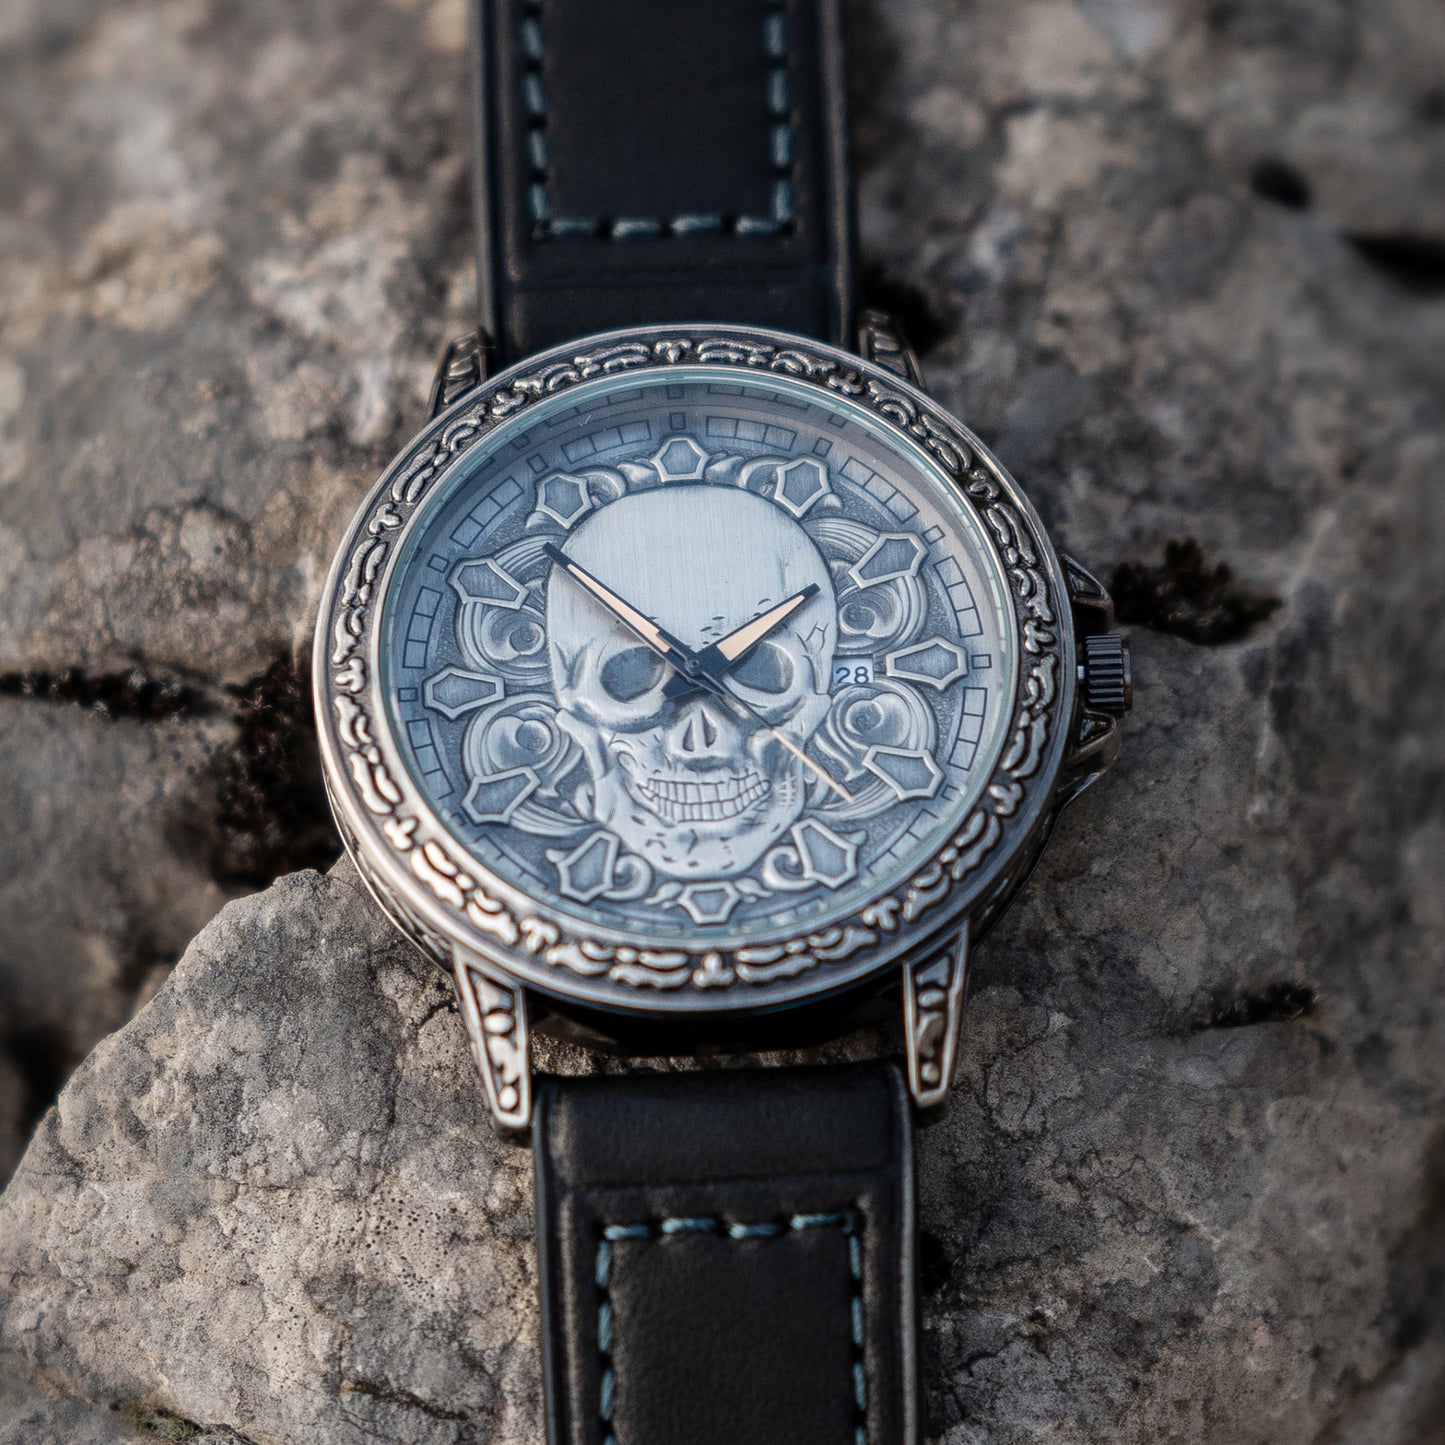 3D Carved Skull Unisex Watch